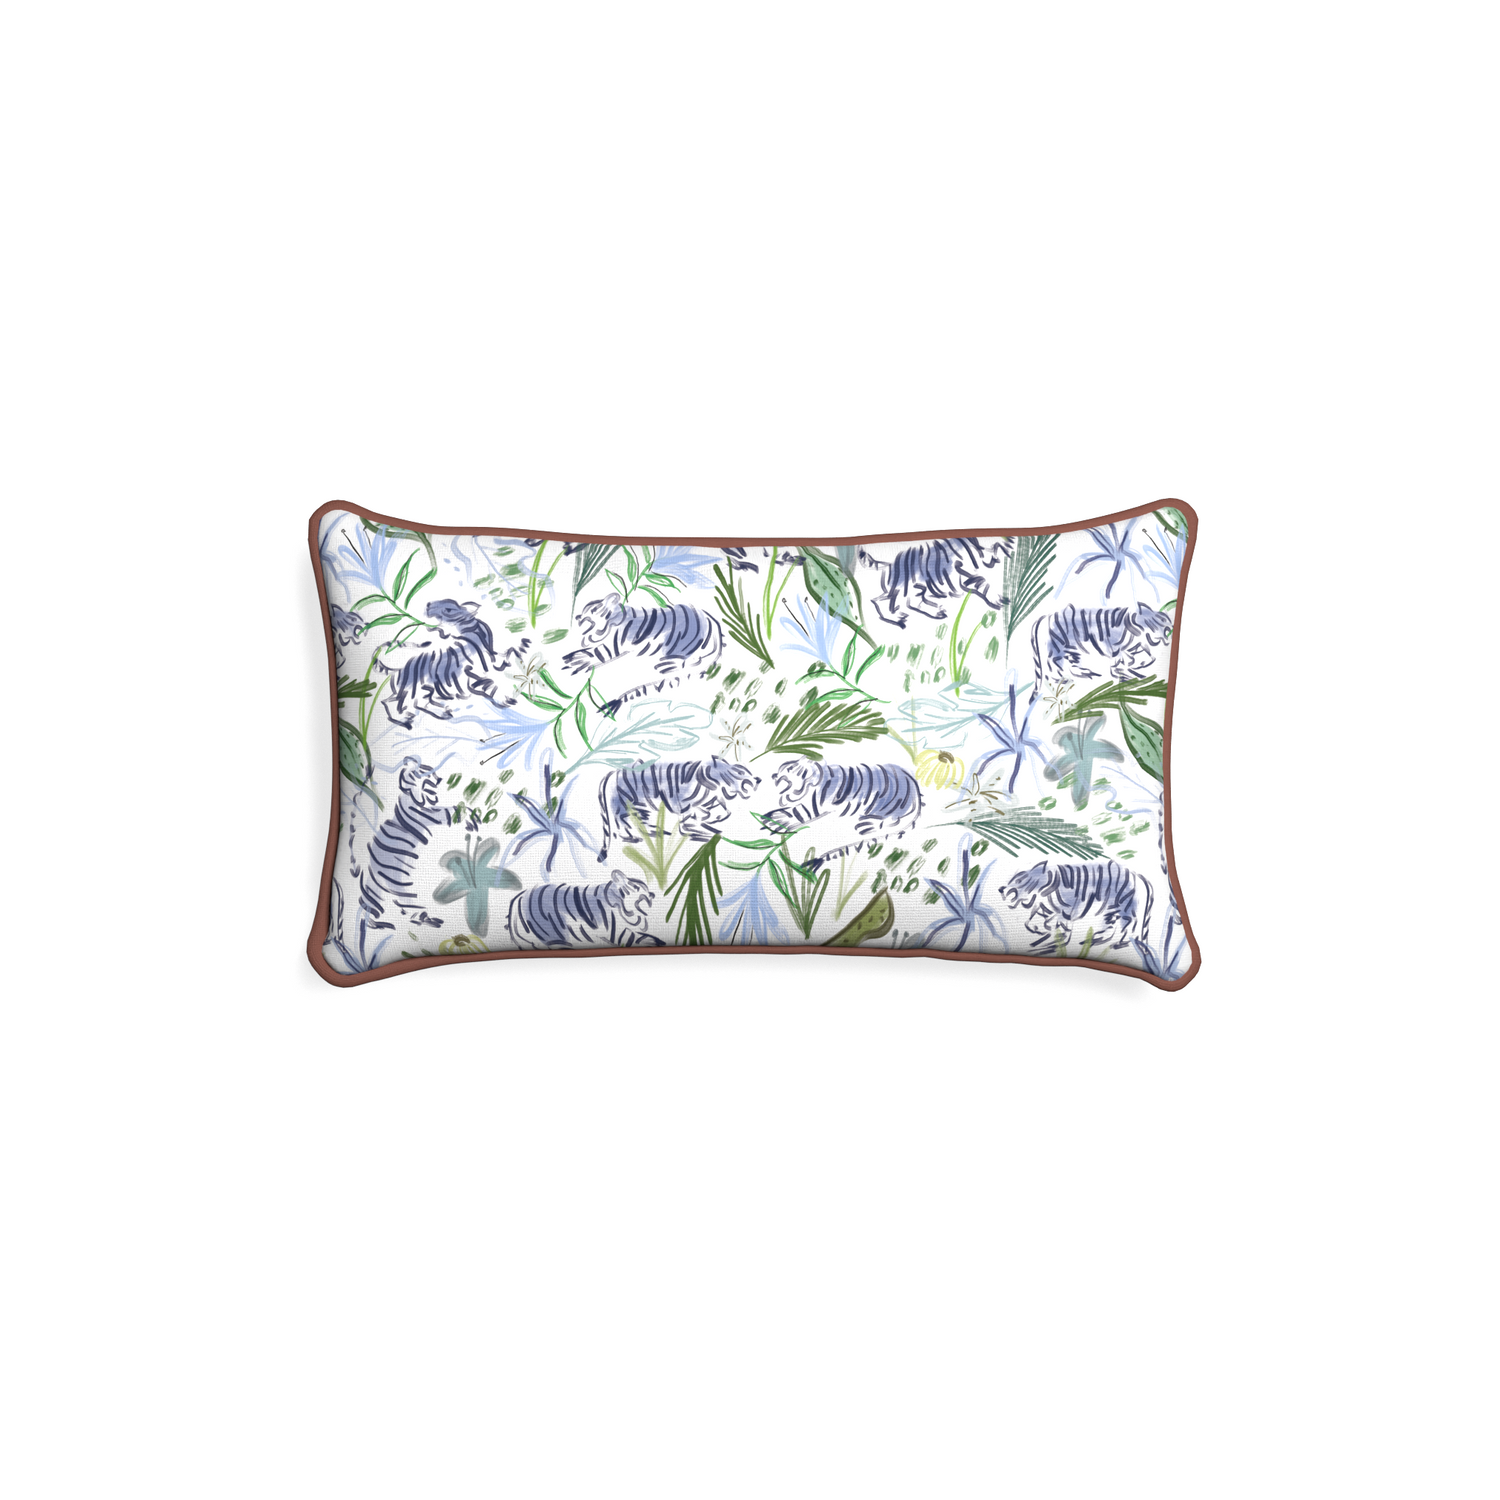 Petite-lumbar frida green custom green tigerpillow with w piping on white background